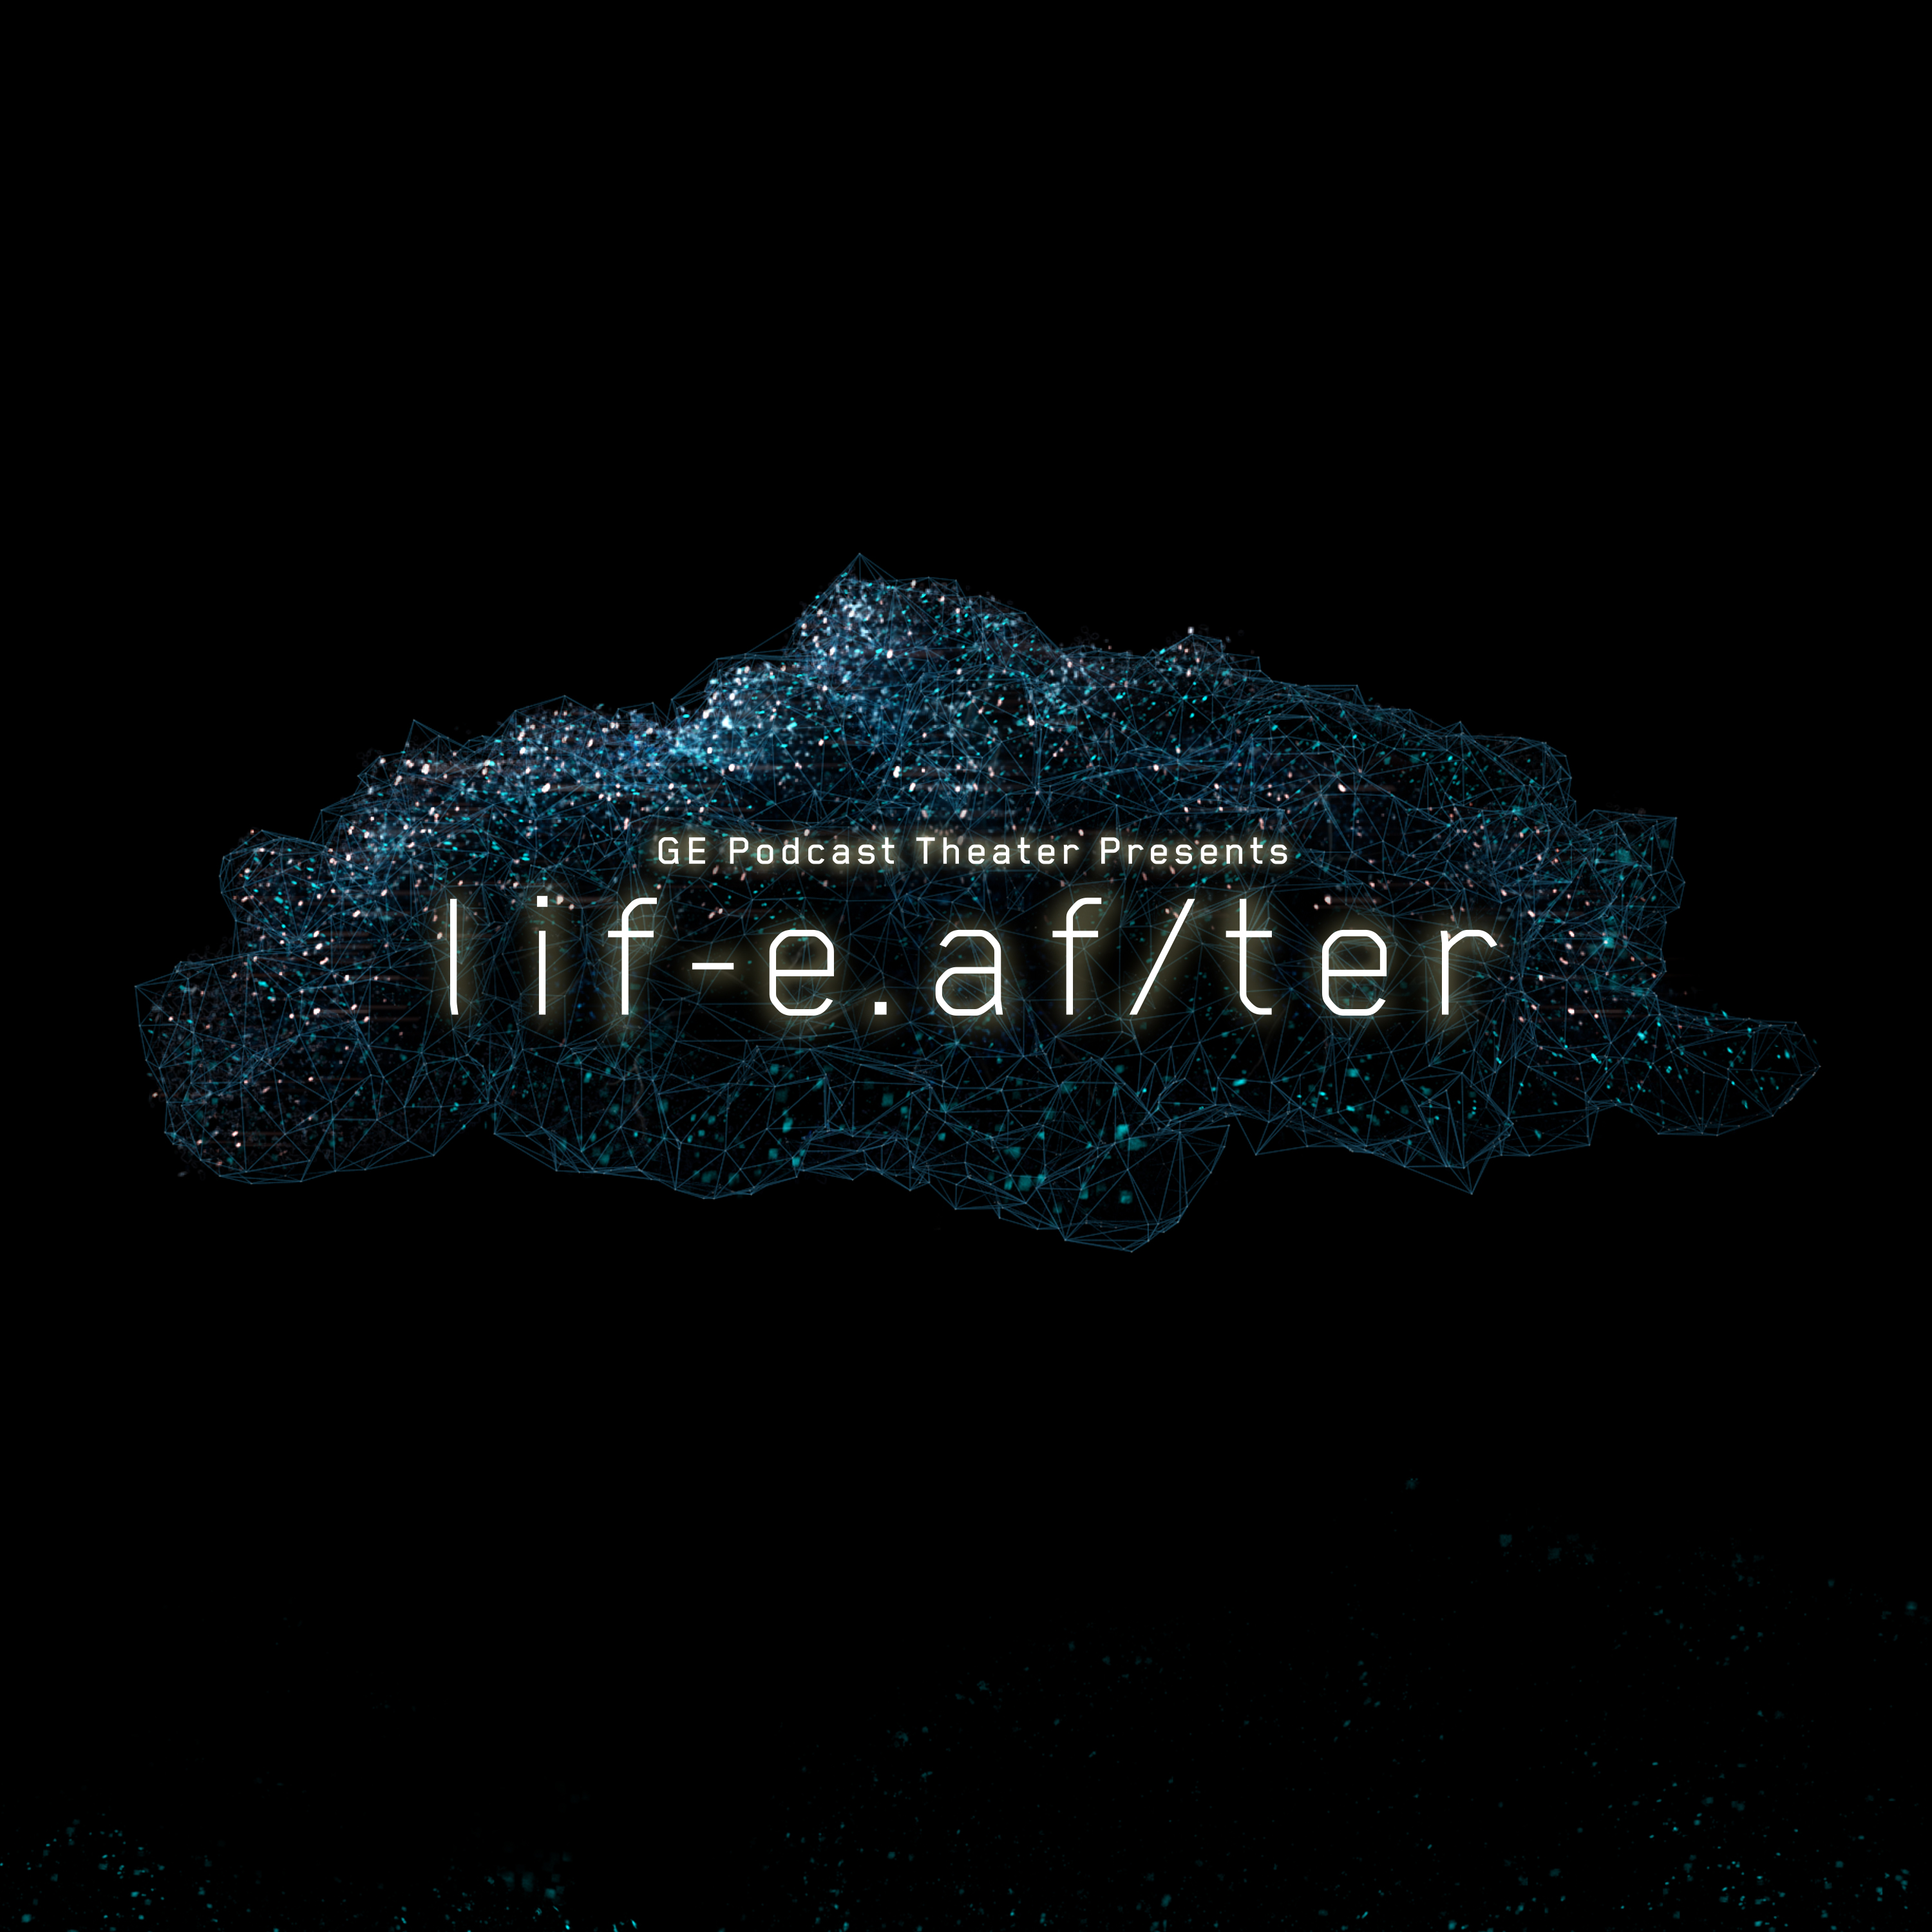 Artwork for the new fictional podcast, LifeAfter